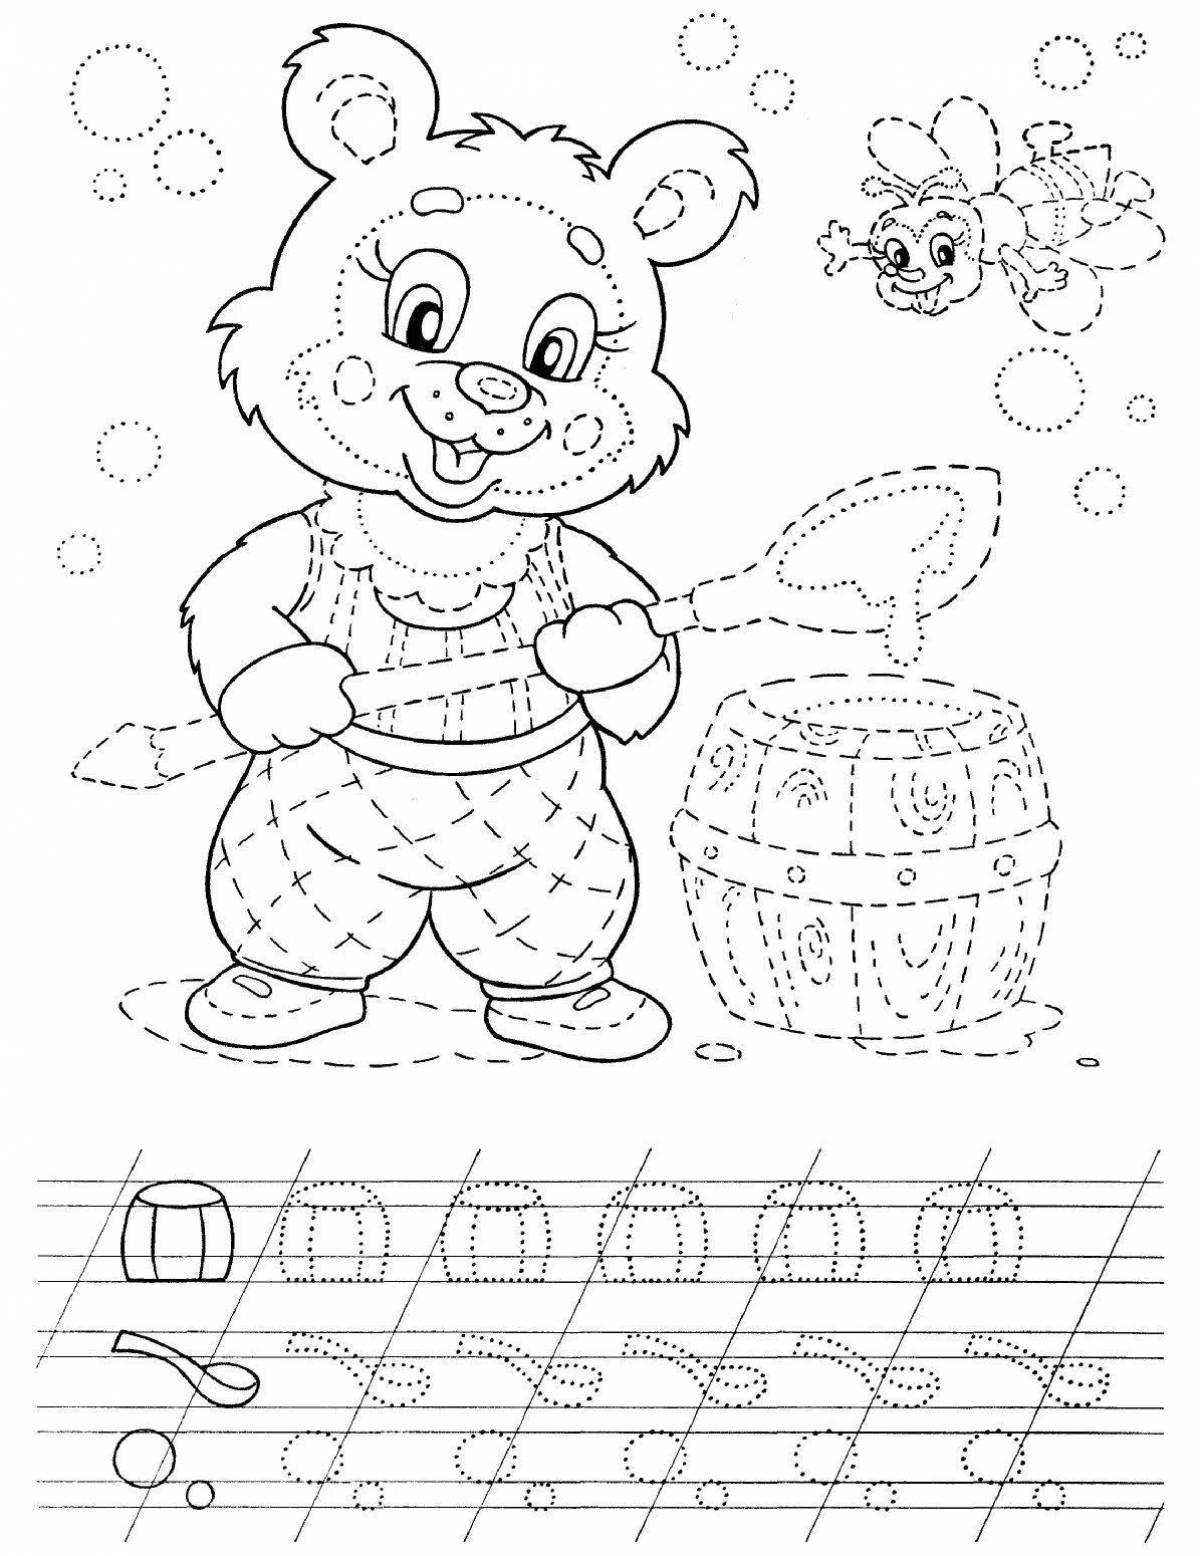 Stimulating prescription coloring book for 5 year olds